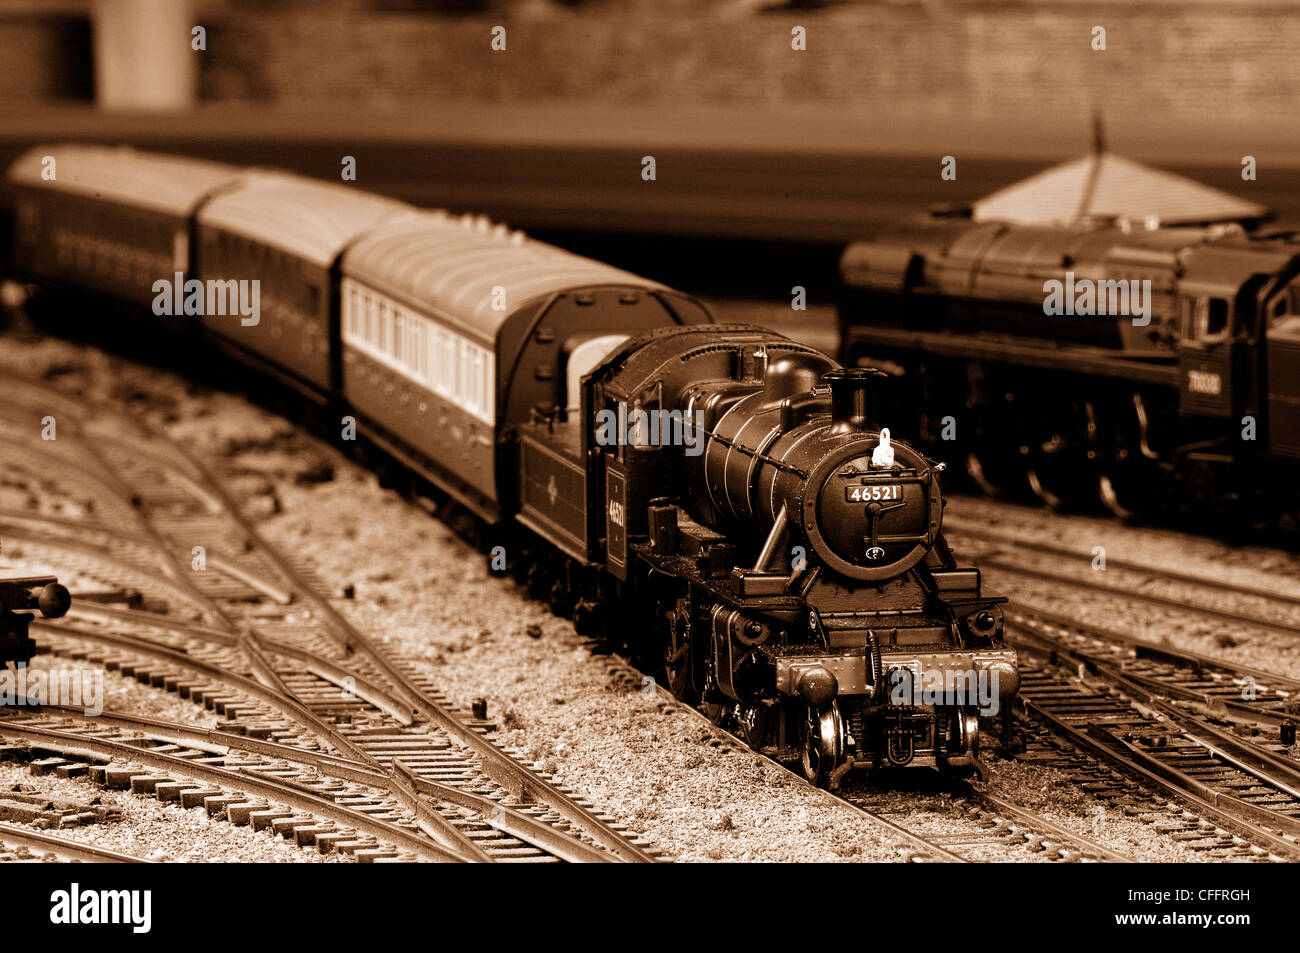 Model Railway Layout showing various trains and models Stock Photo